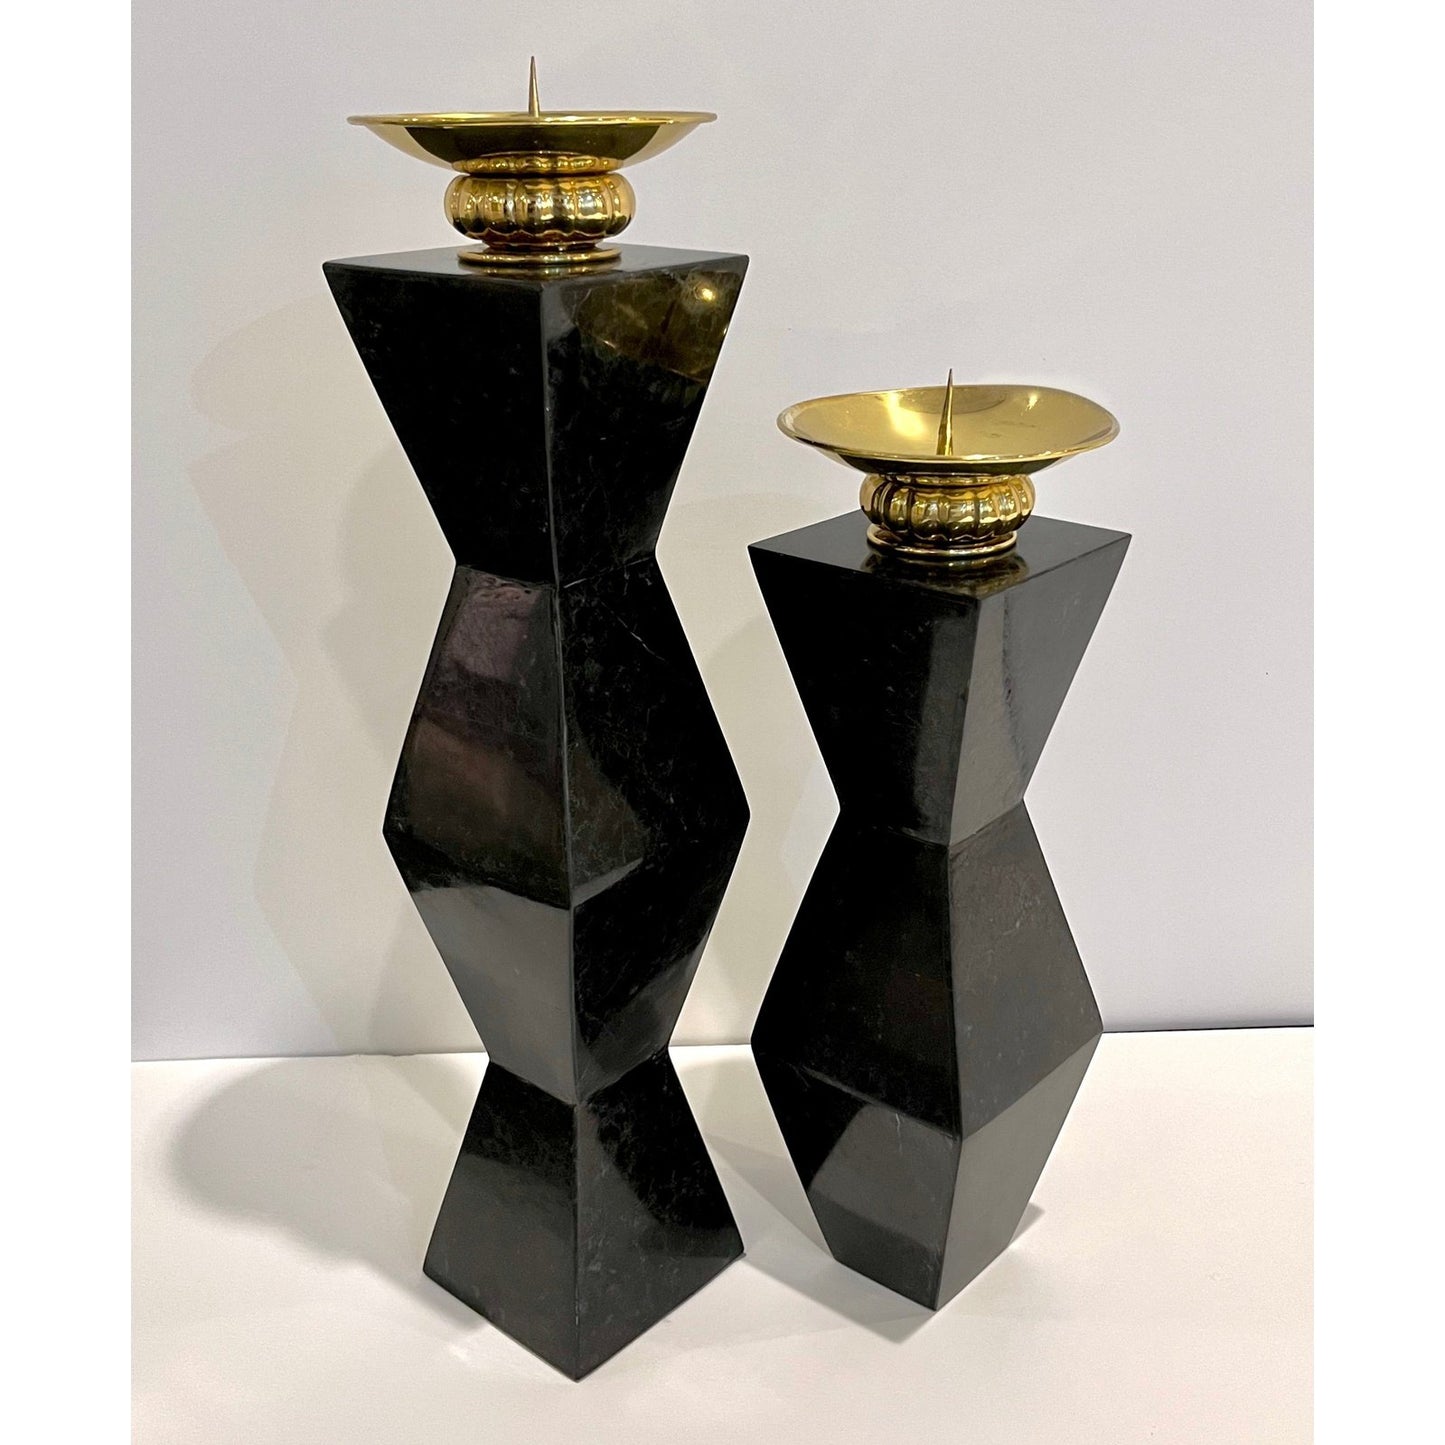 French Vintage Set of 2 Modern Black Lacquer Metal Geometric Cubist Candlesticks